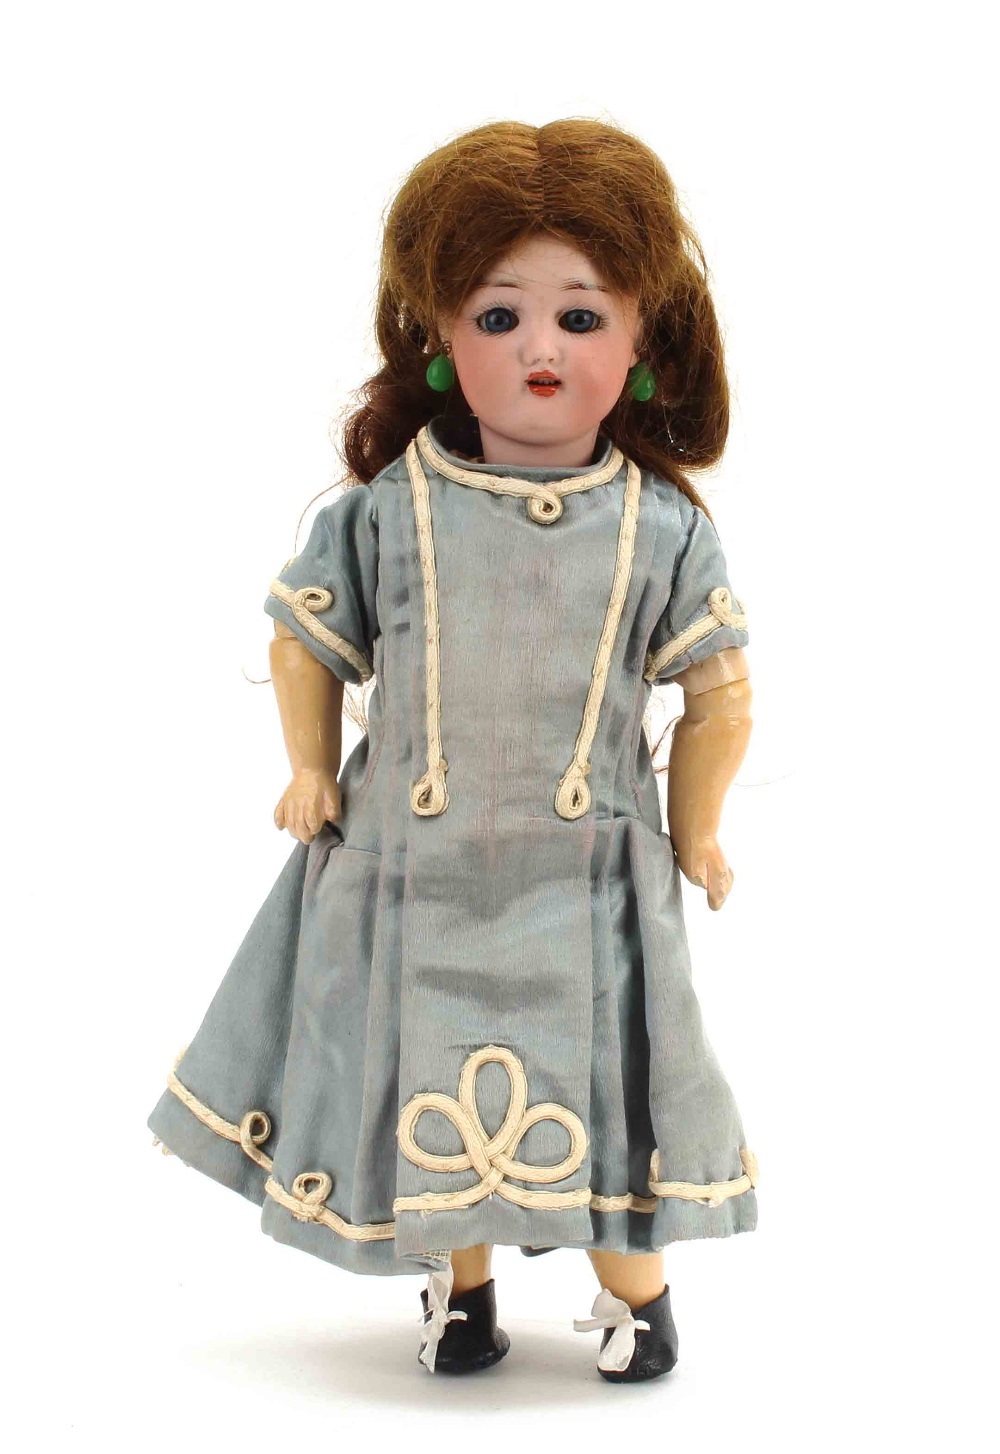 A Simon & Halbig 1078 child doll, with blue sleeping eyes, pierced ears, brown mohair wig, jointed